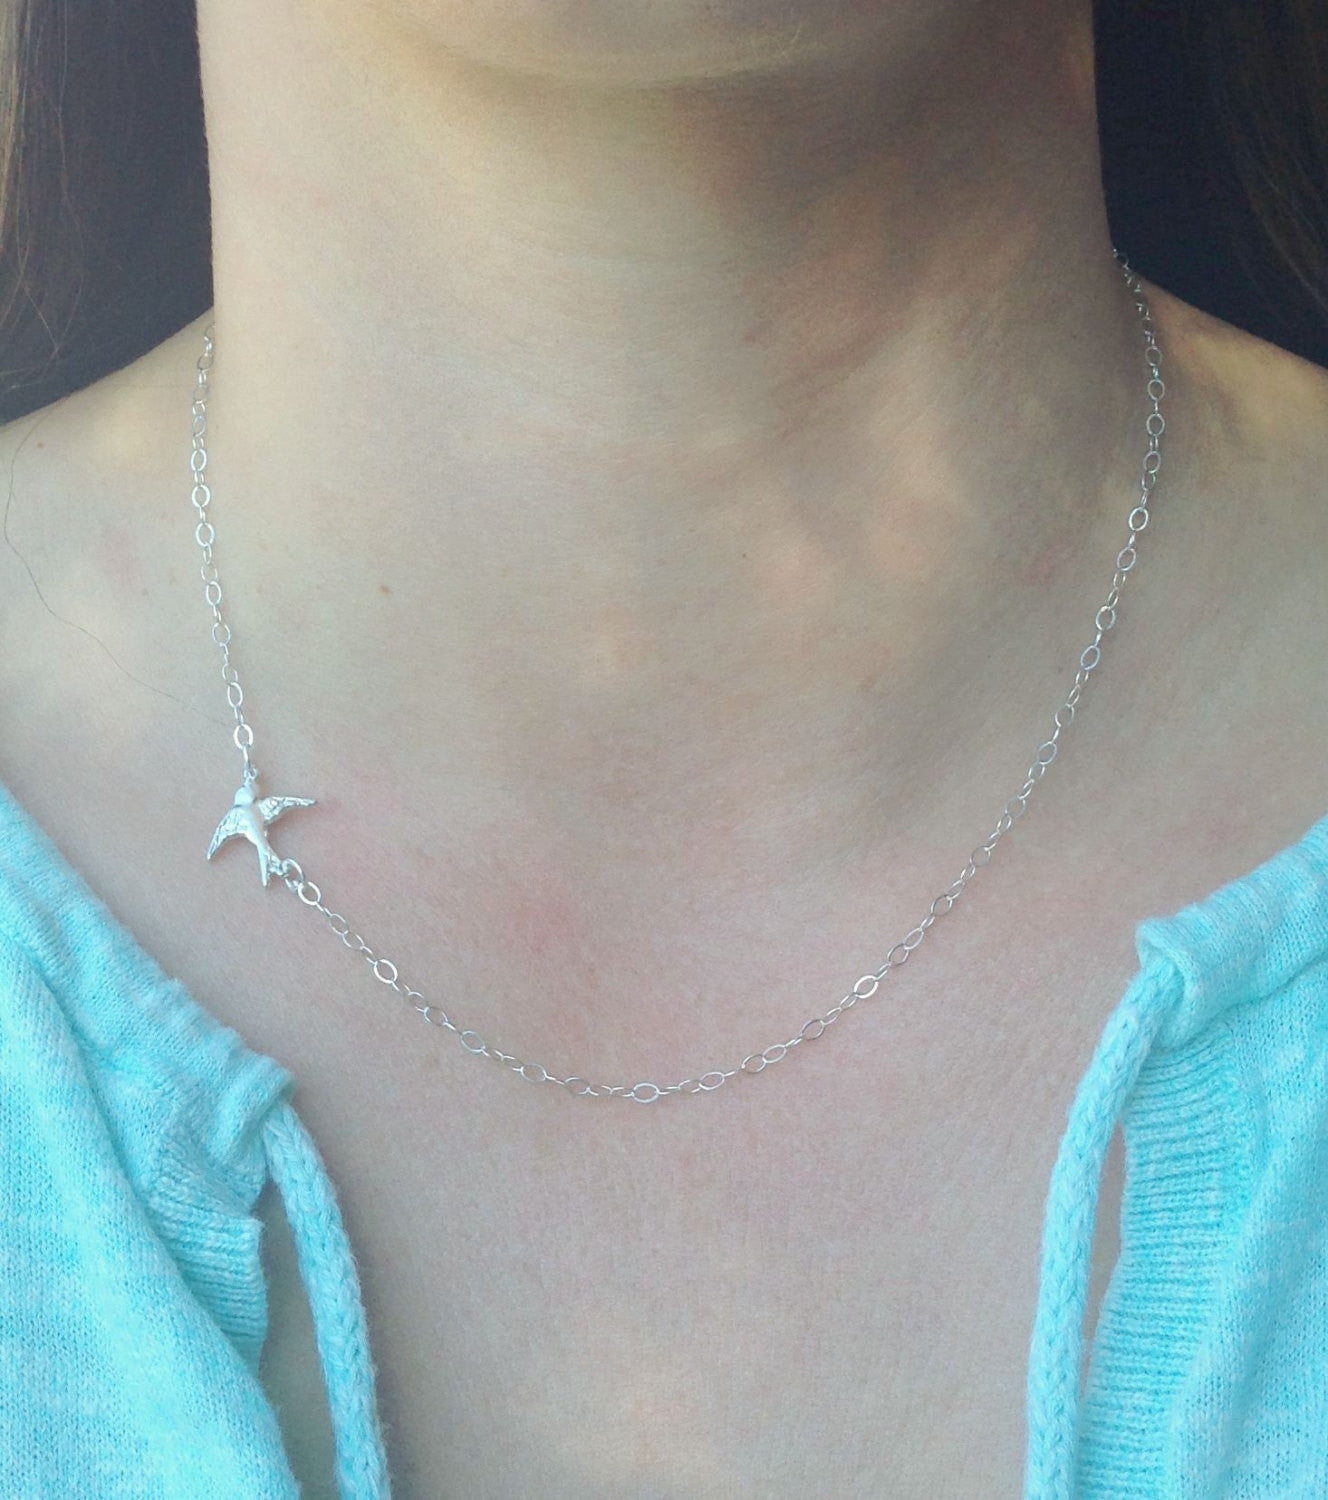 Sideways Cross Necklace, Sideways Swallow Necklace, Sparrow Necklace,Layered Necklace, Cross Necklace, Swallow - Natashaaloha, jewelry, bracelets, necklace, keychains, fishing lures, gifts for men, charms, personalized, 